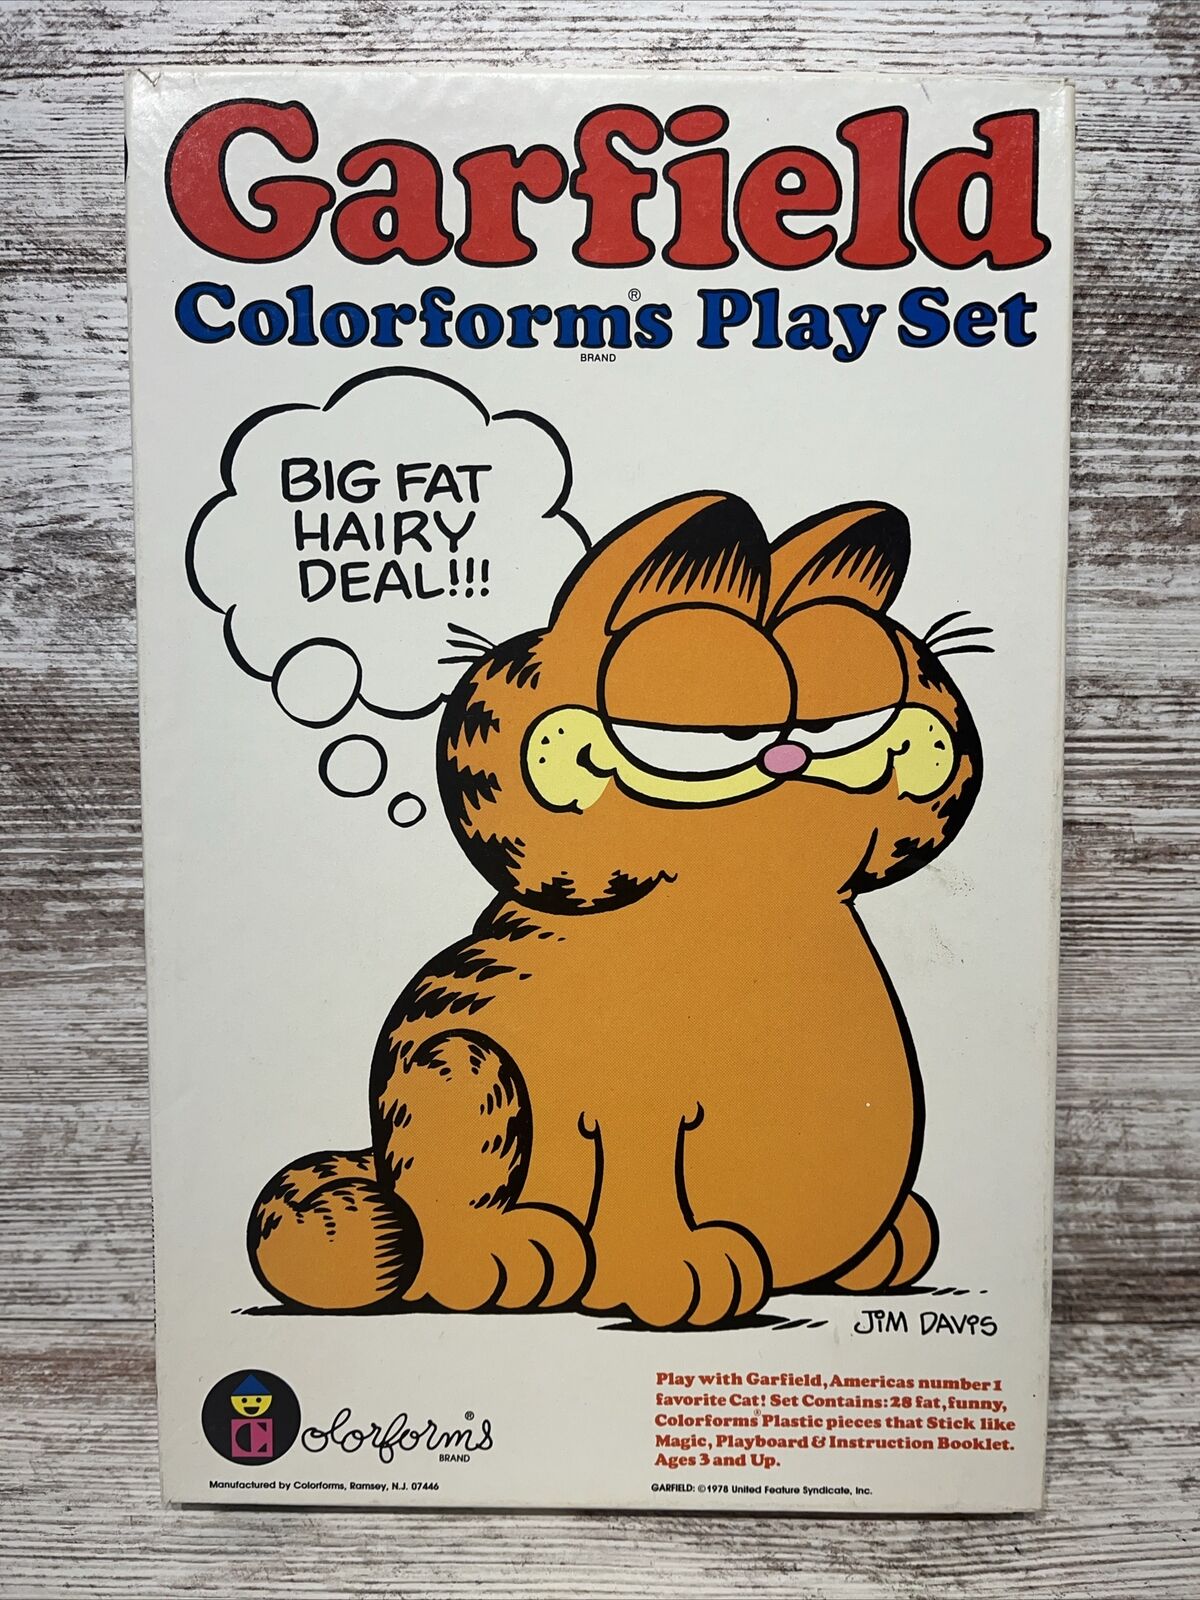 Vintage 1978 Garfield “Big Fat Hairy Deal” Colorforms Playset (Complete)￼